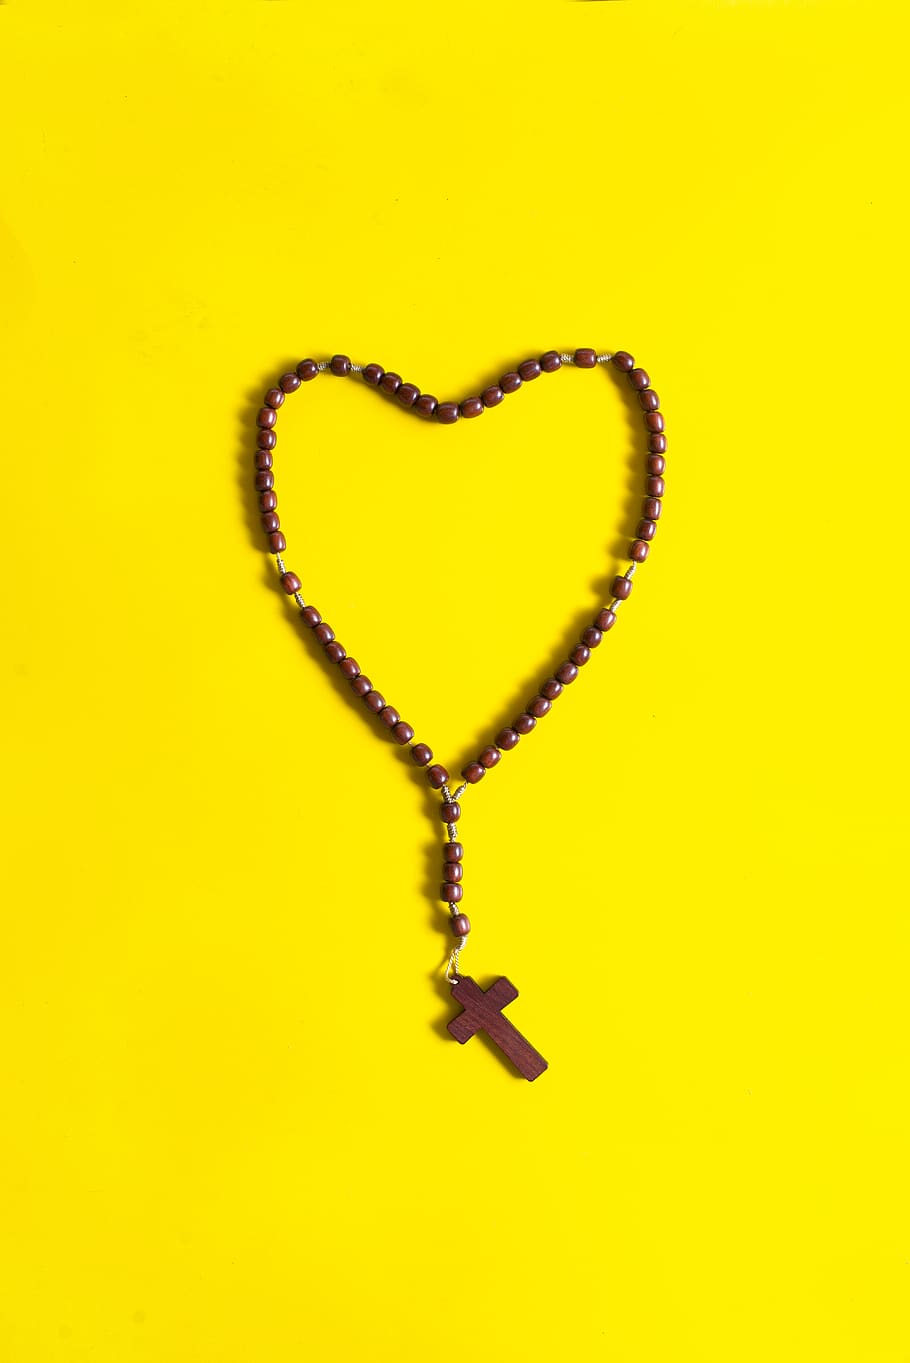 Brown Rosary on Yellow Surface, art, color, design, disjunct, HD wallpaper